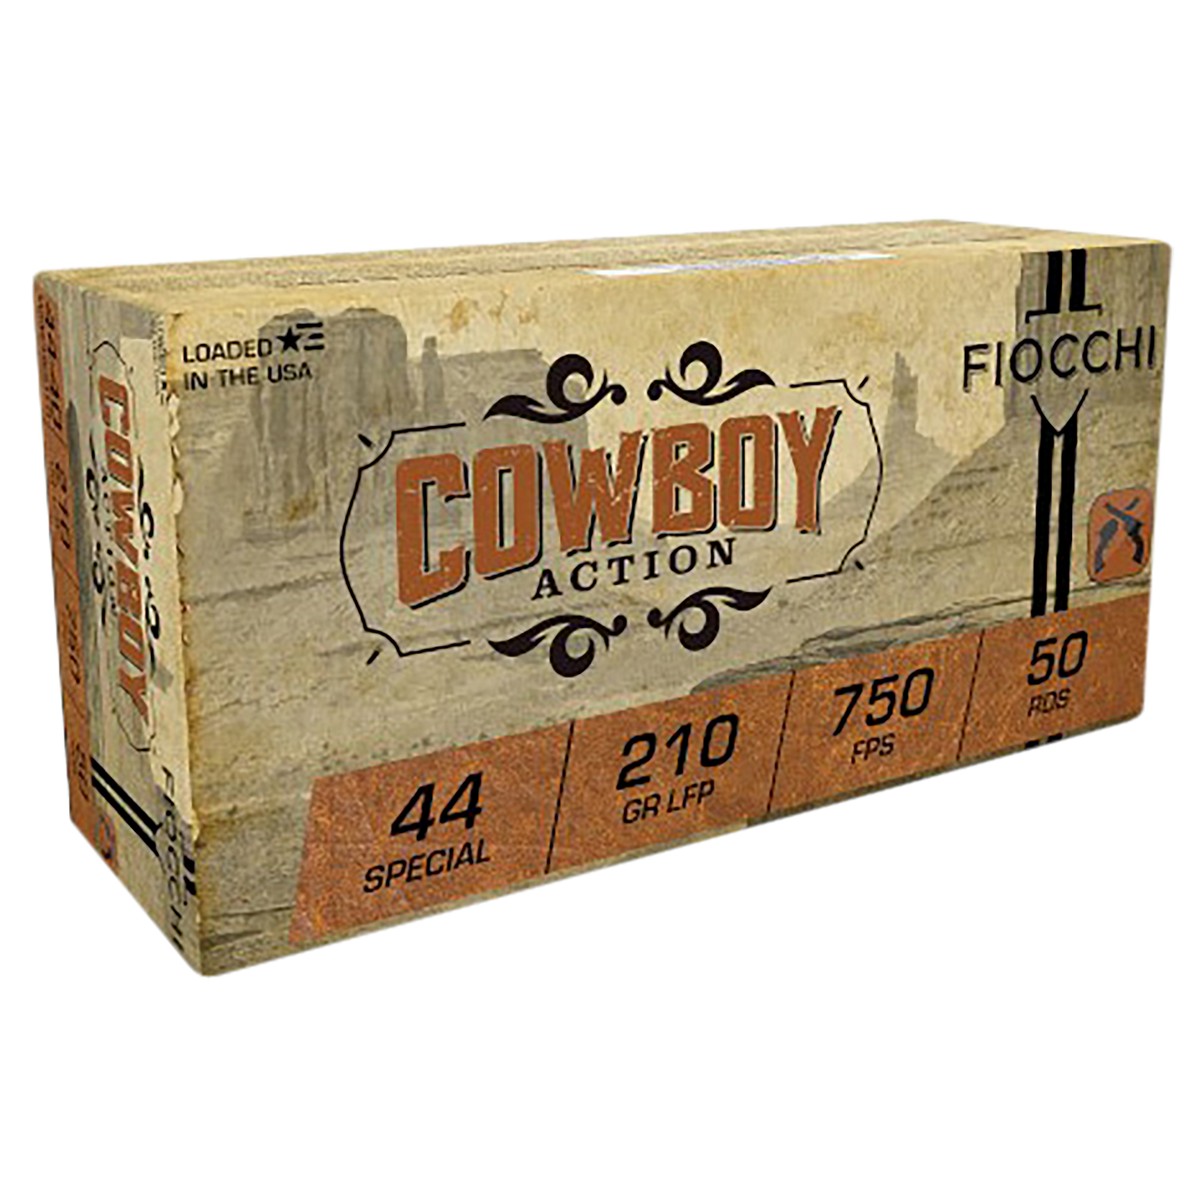 cchi Cowboy Action 44 Special 210 Gr Lead Flat Point Ammo